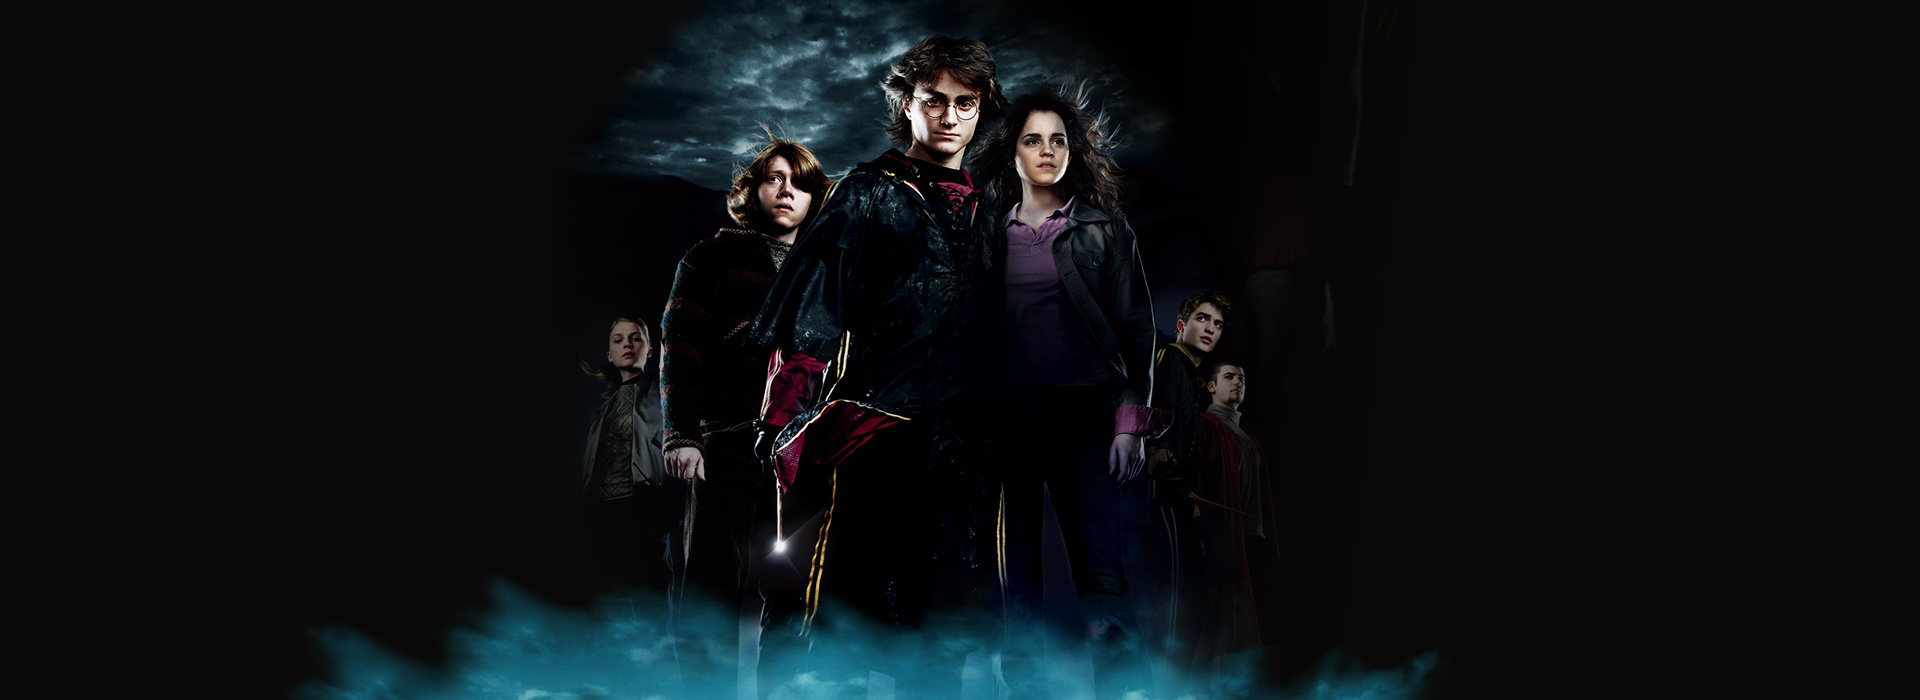 Movie poster Harry Potter and the Goblet of Fire